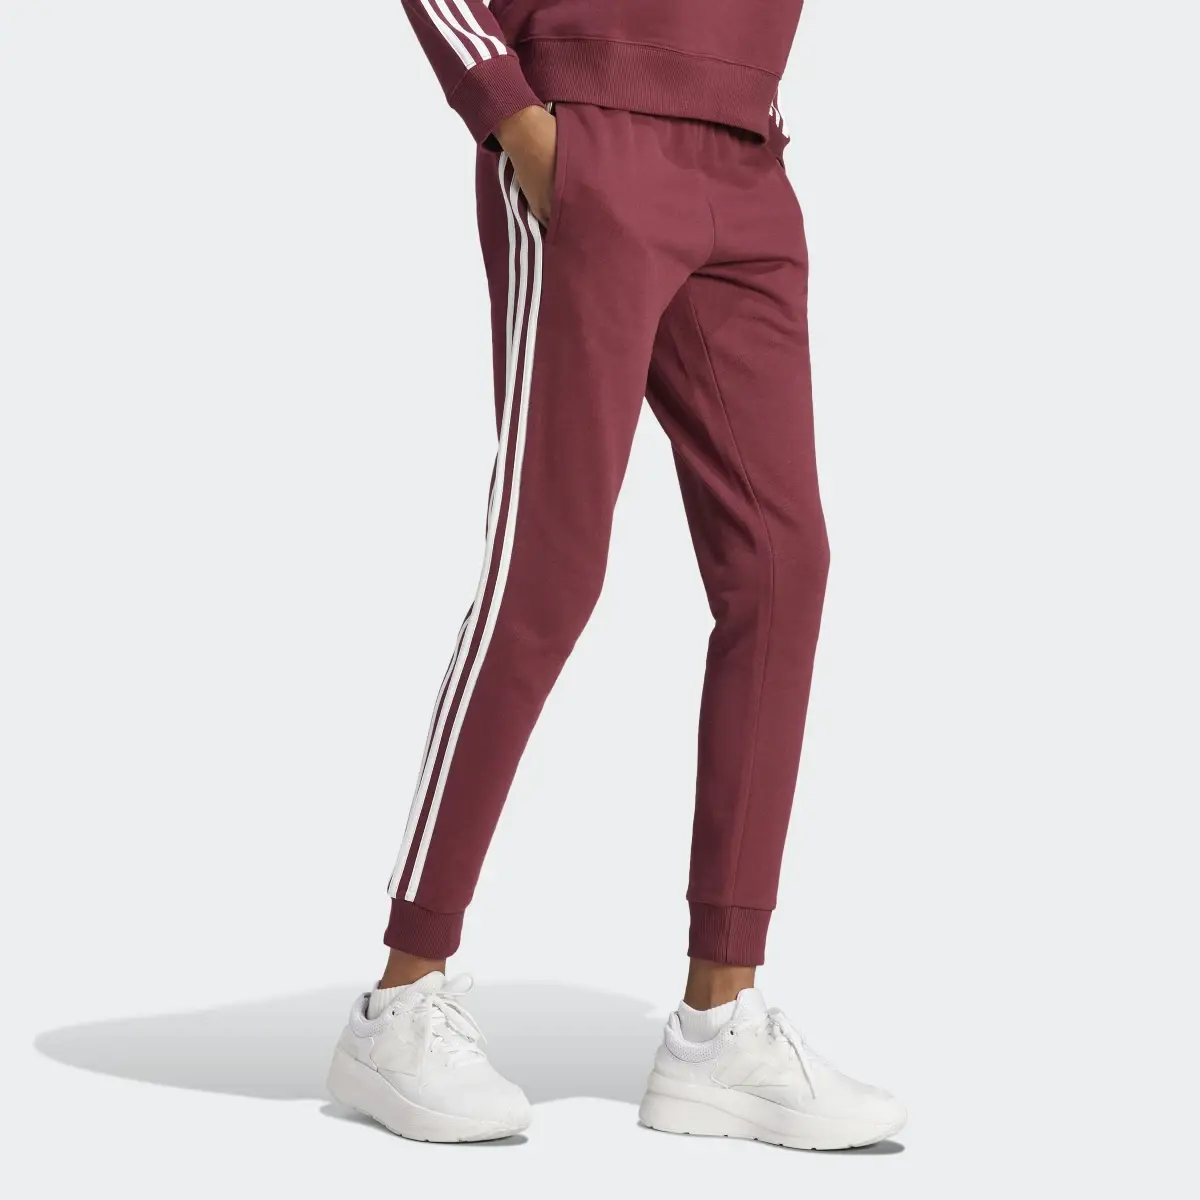 Adidas Essentials 3-Stripes French Terry Cuffed Pants. 3